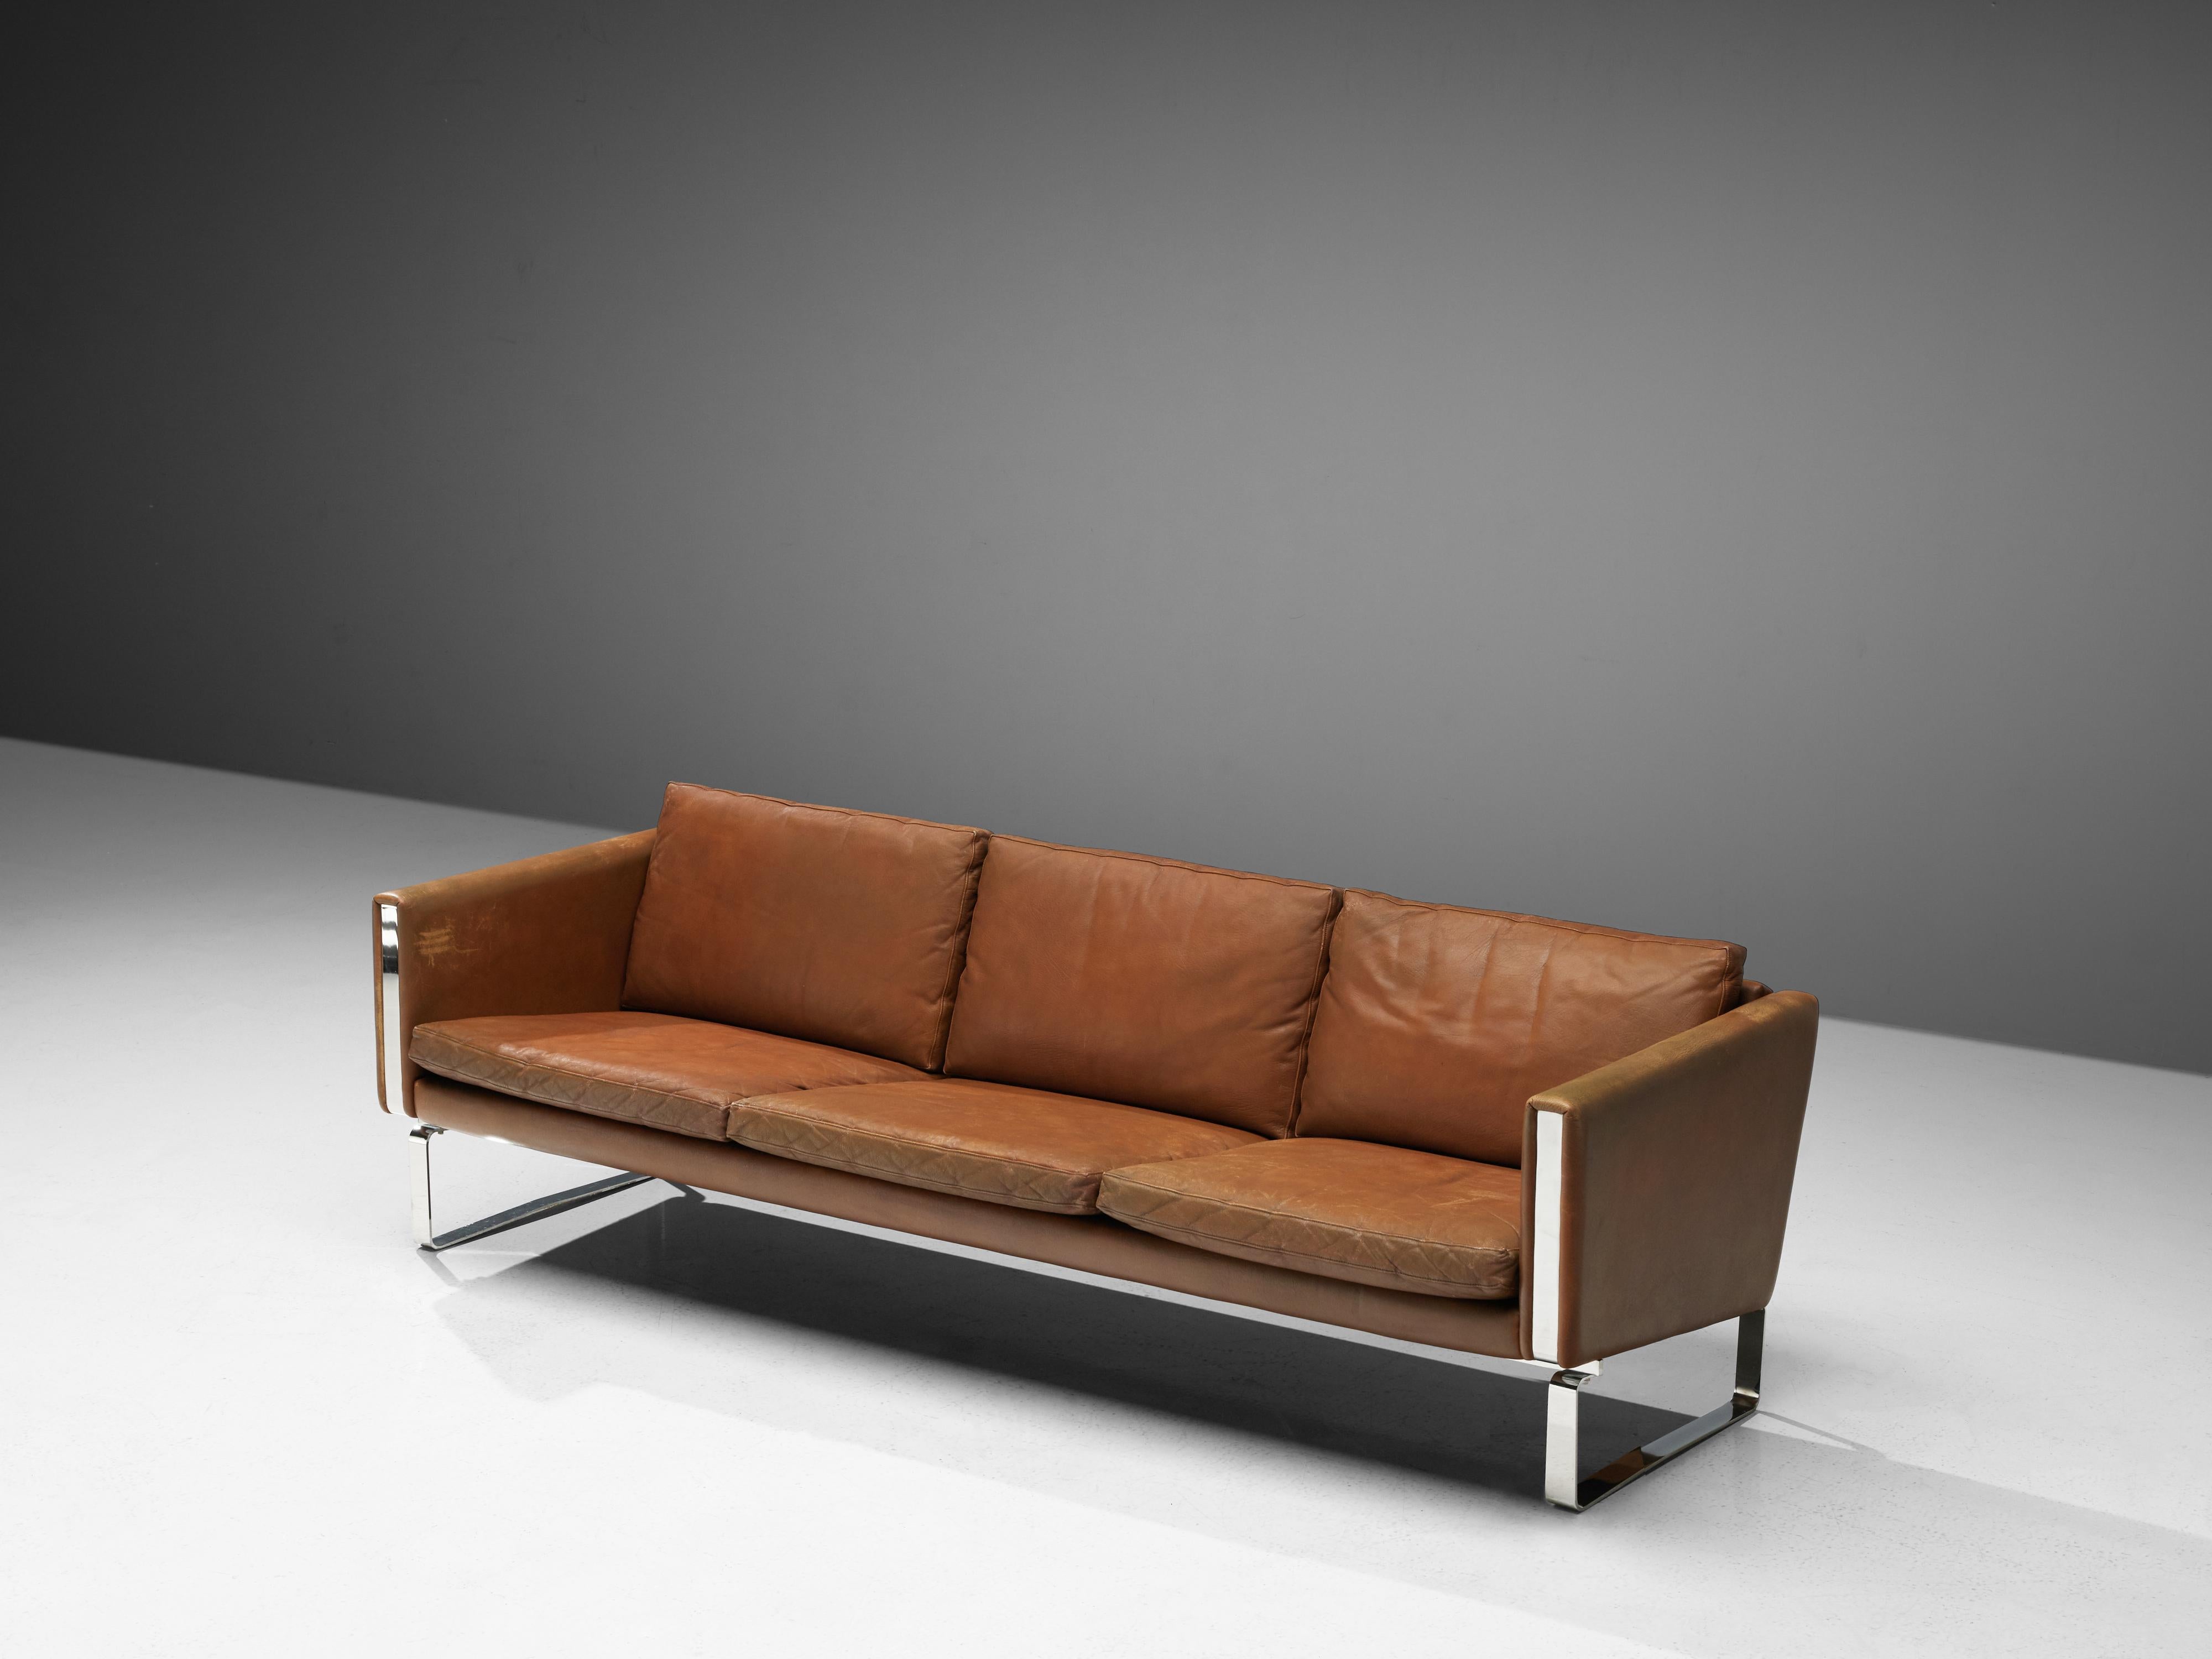 Hans J. Wegner for Carl Hansen & Søn, sofa, leather, chrome, Denmark, 1970s. 

The CH103 sofa by Hans J. Wegner for Carl Hansen & Søn is a modern 3-seat sofa ideal for contemporary interiors. This brown leather sofa with a square steel base on